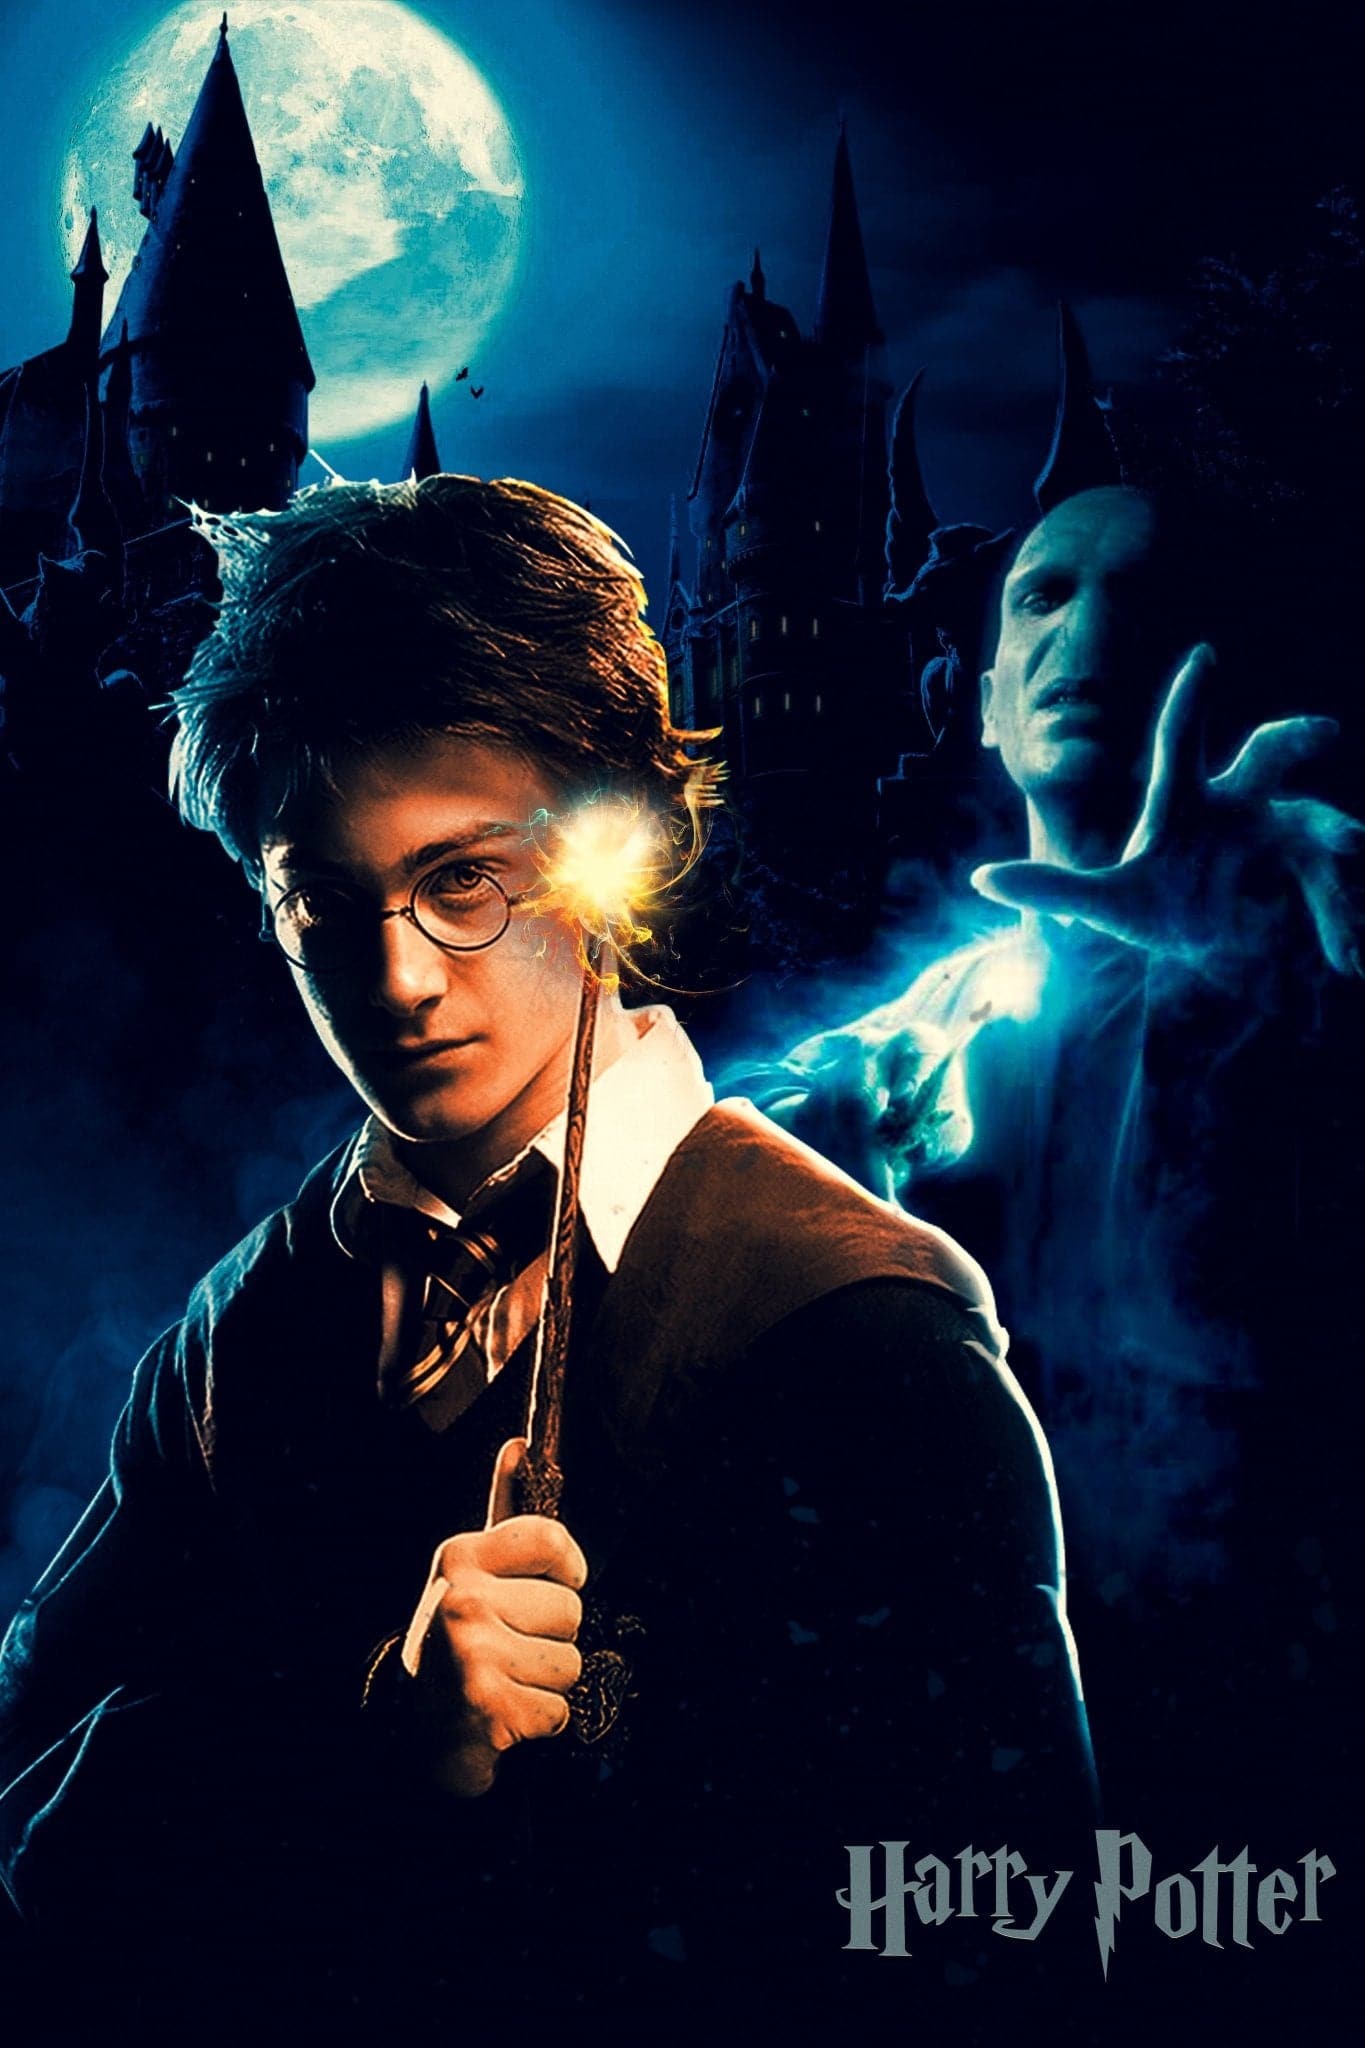 Harry Potter ‘One Can’t Live, While The Other Survives’ Poster - Posters Plug